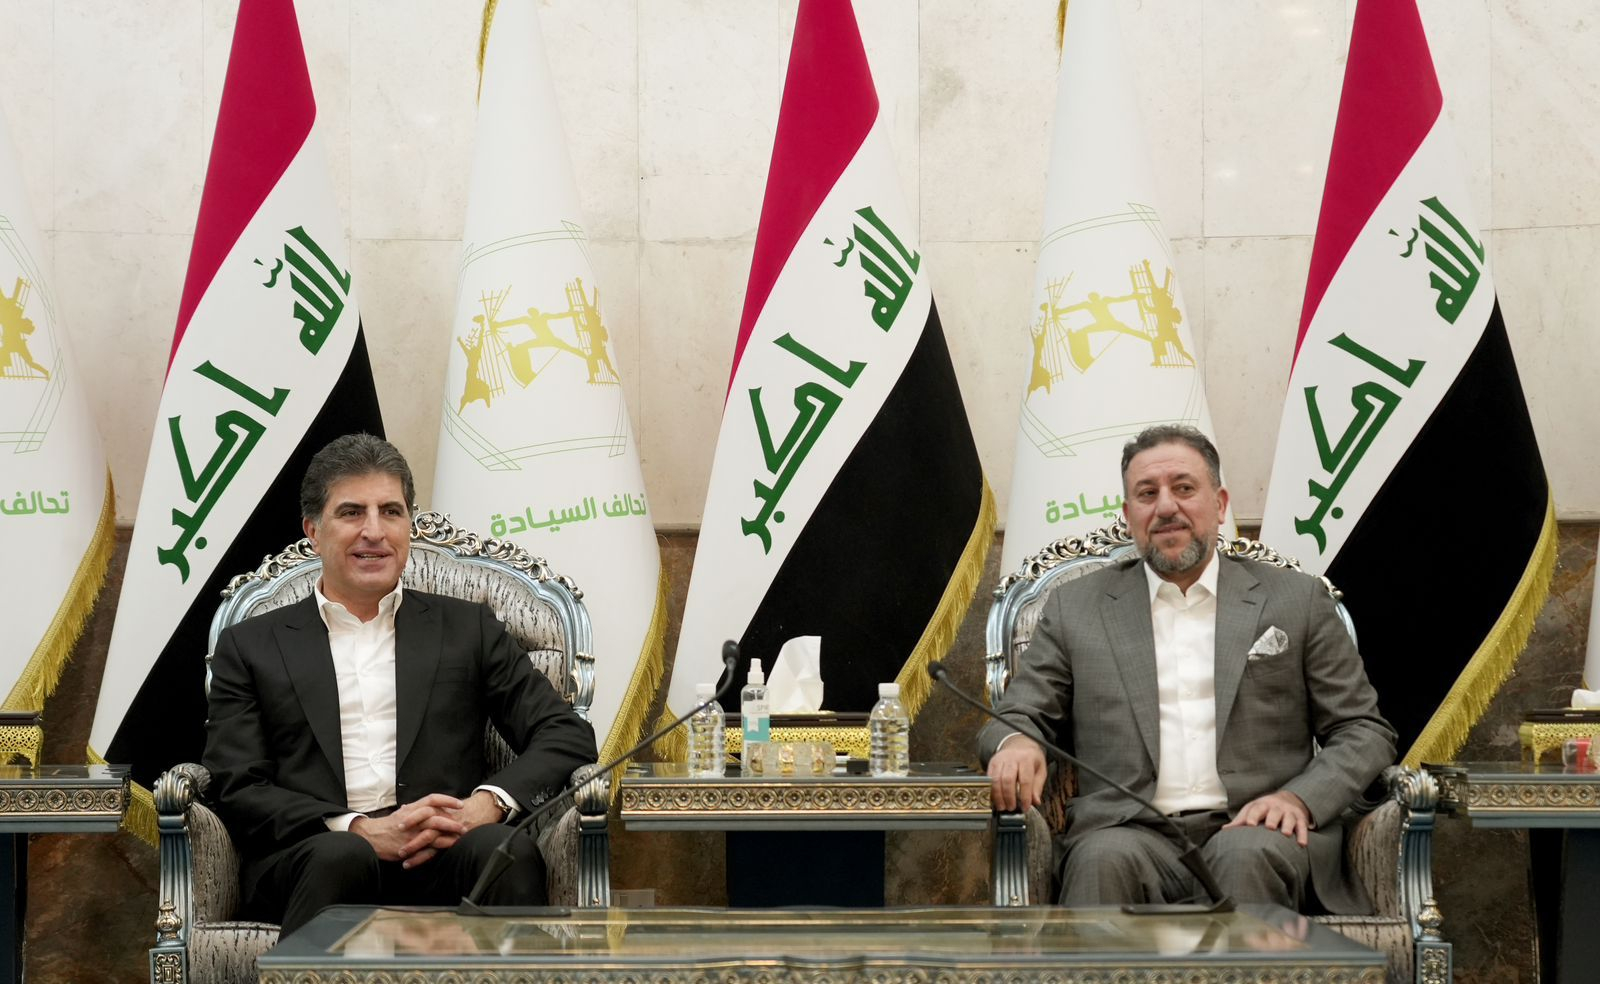 Nechirvan Barzani, Khamis al-Khanjar reiterate commitment to supporting Iraq's federal government